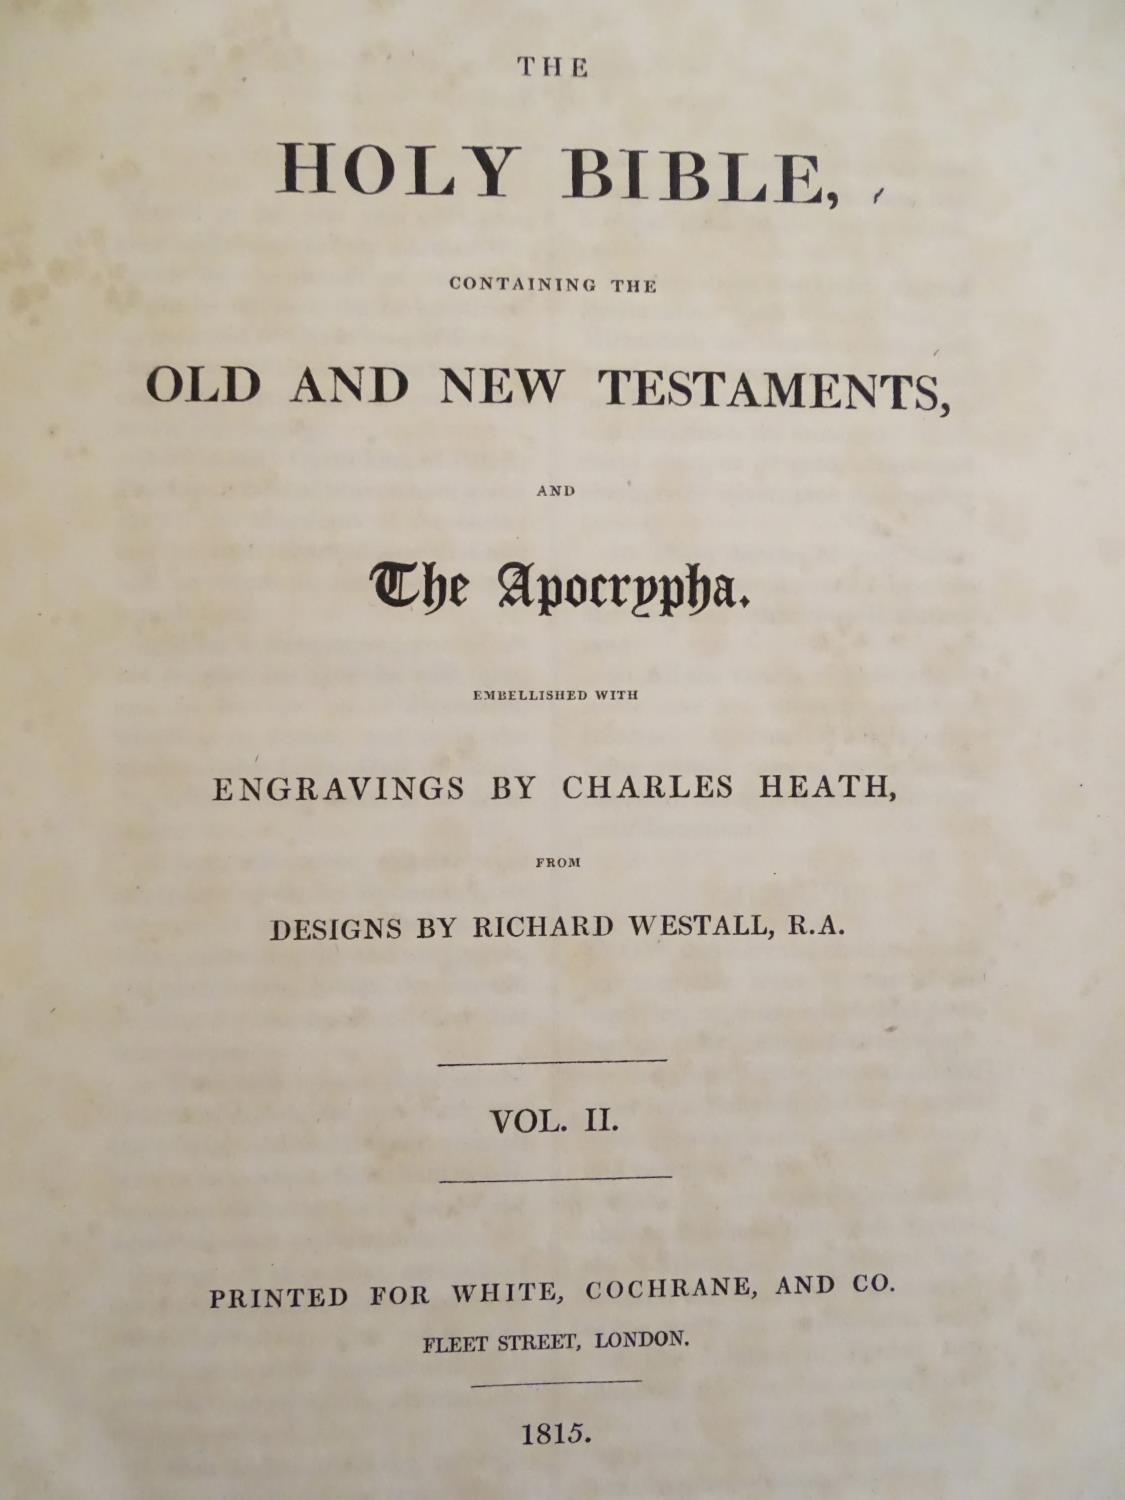 Book: The Holy Bible, illustrated by Charles Heath / Richard Westall, pub. White Cochrane and Co - Image 9 of 10